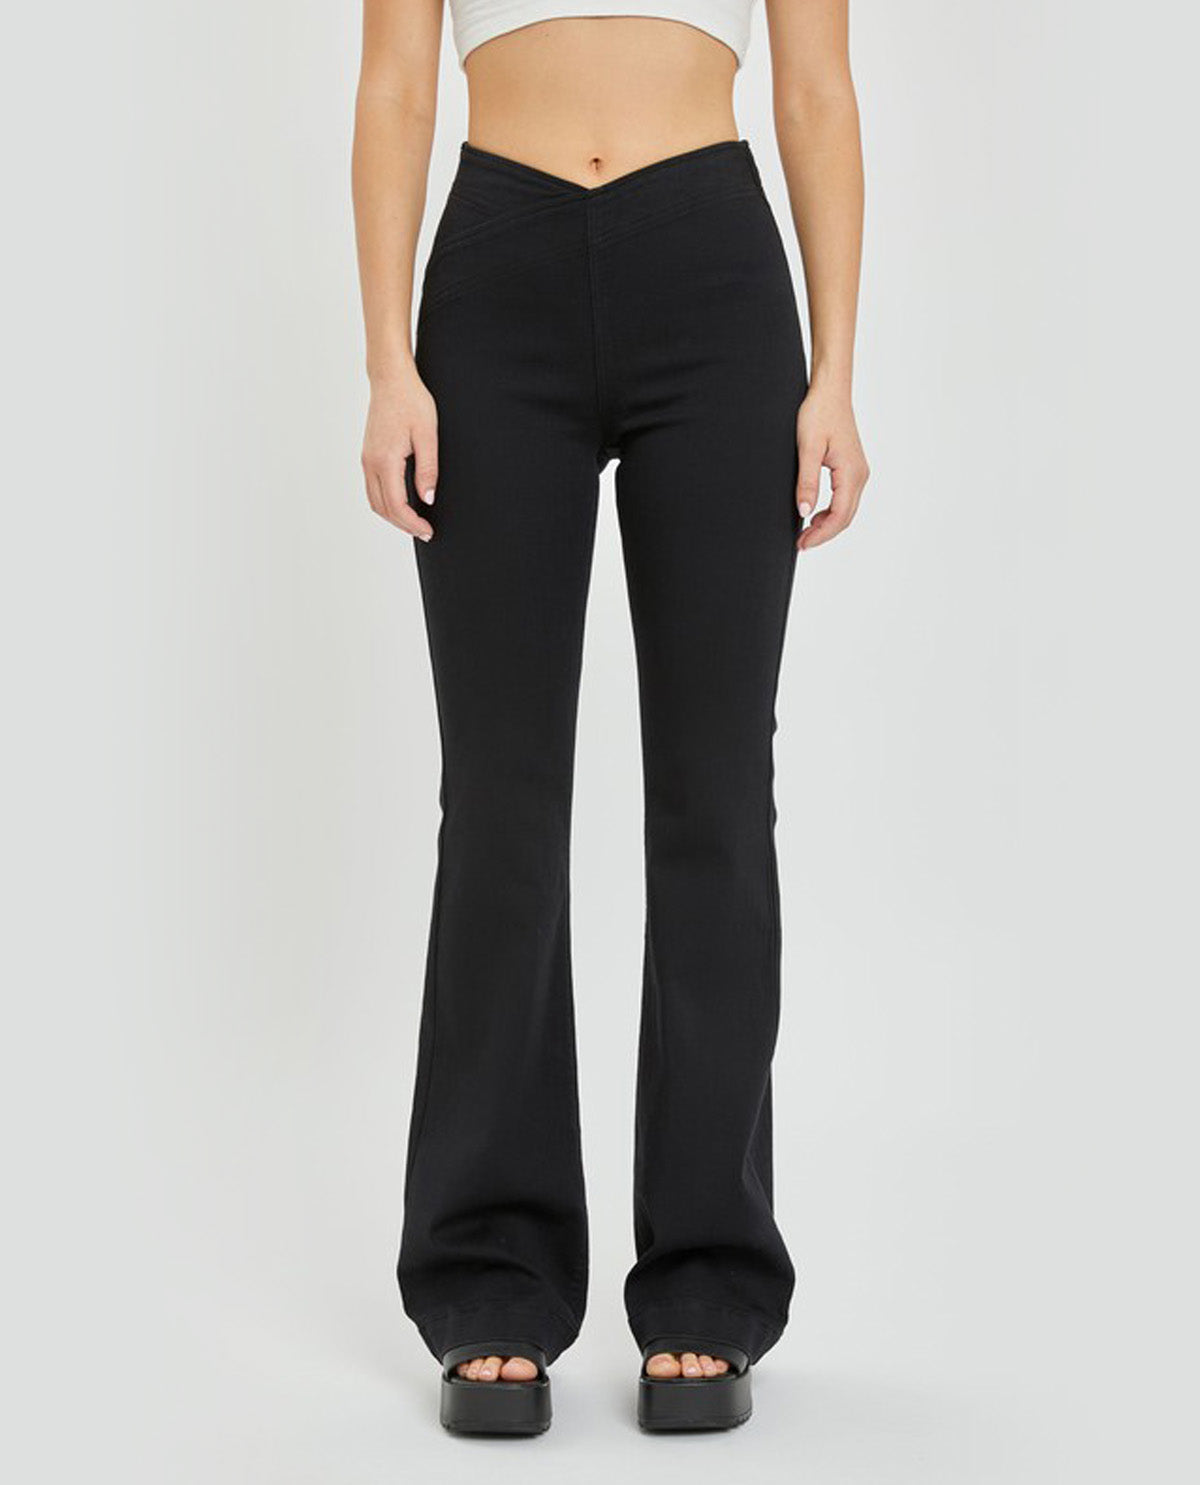 Cello Overlapped Waist Band Pull On Flare Jeans